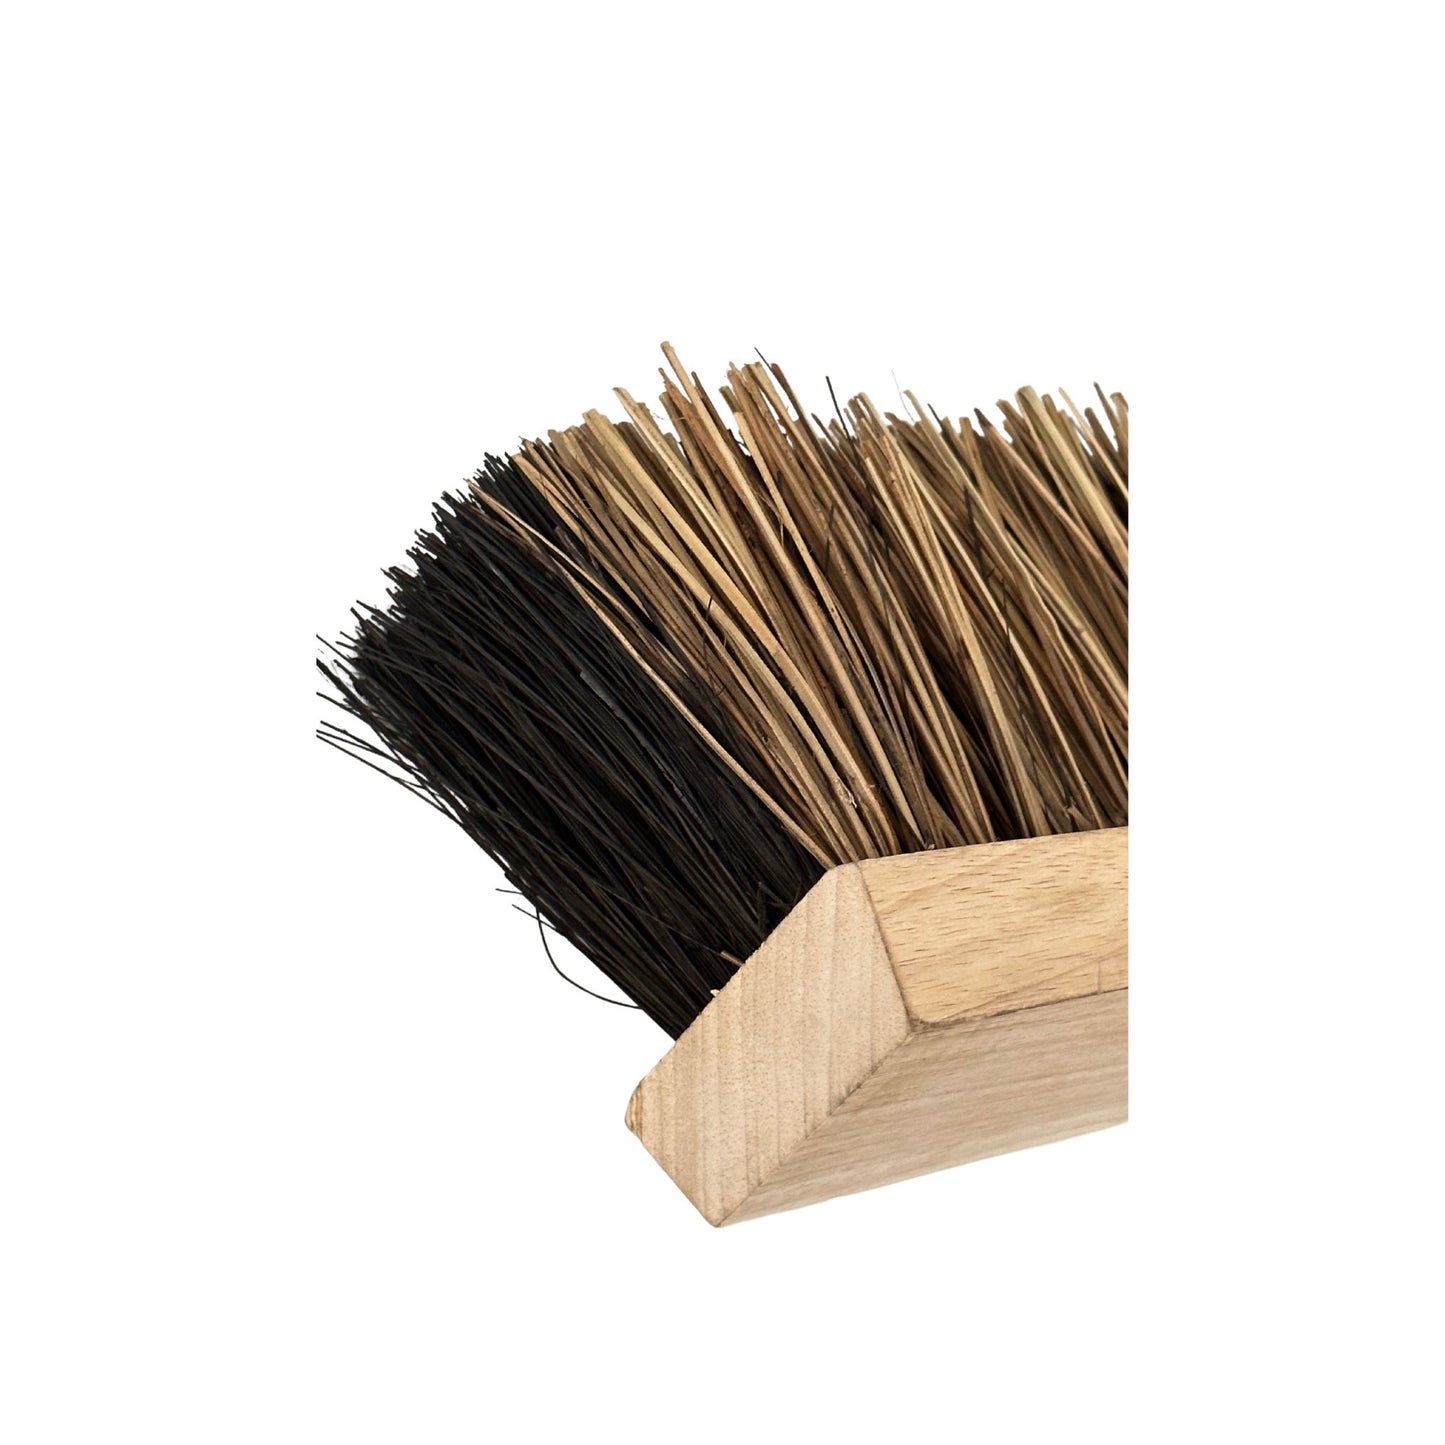 Viking Yard Broom - Bassine Fill with Cane Front - 355mm - VTBY2